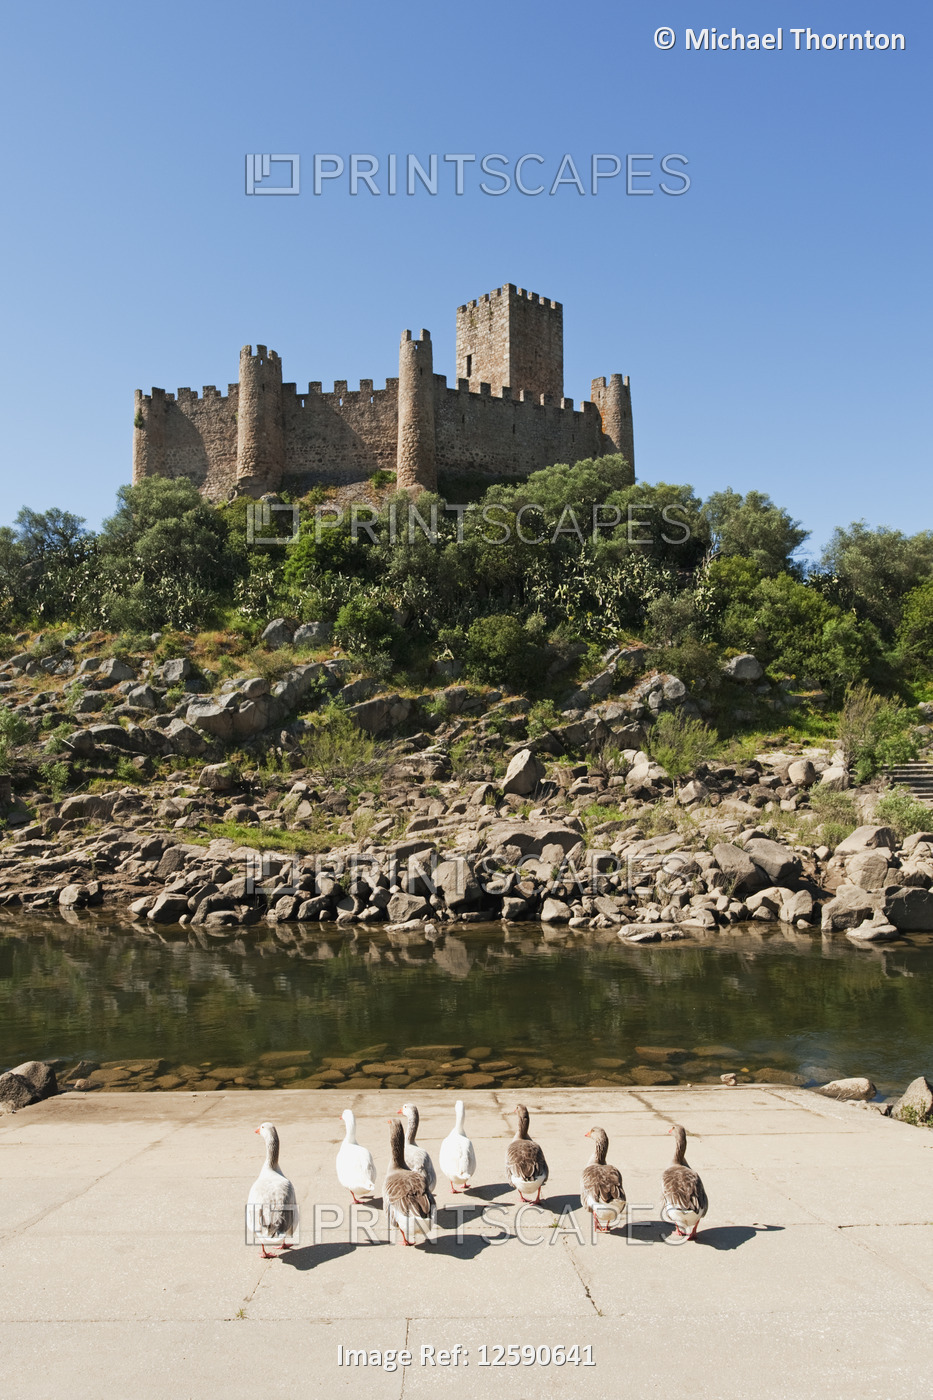 Castelo de Almourol standing in the middle of the River Tejo, constructed in ...